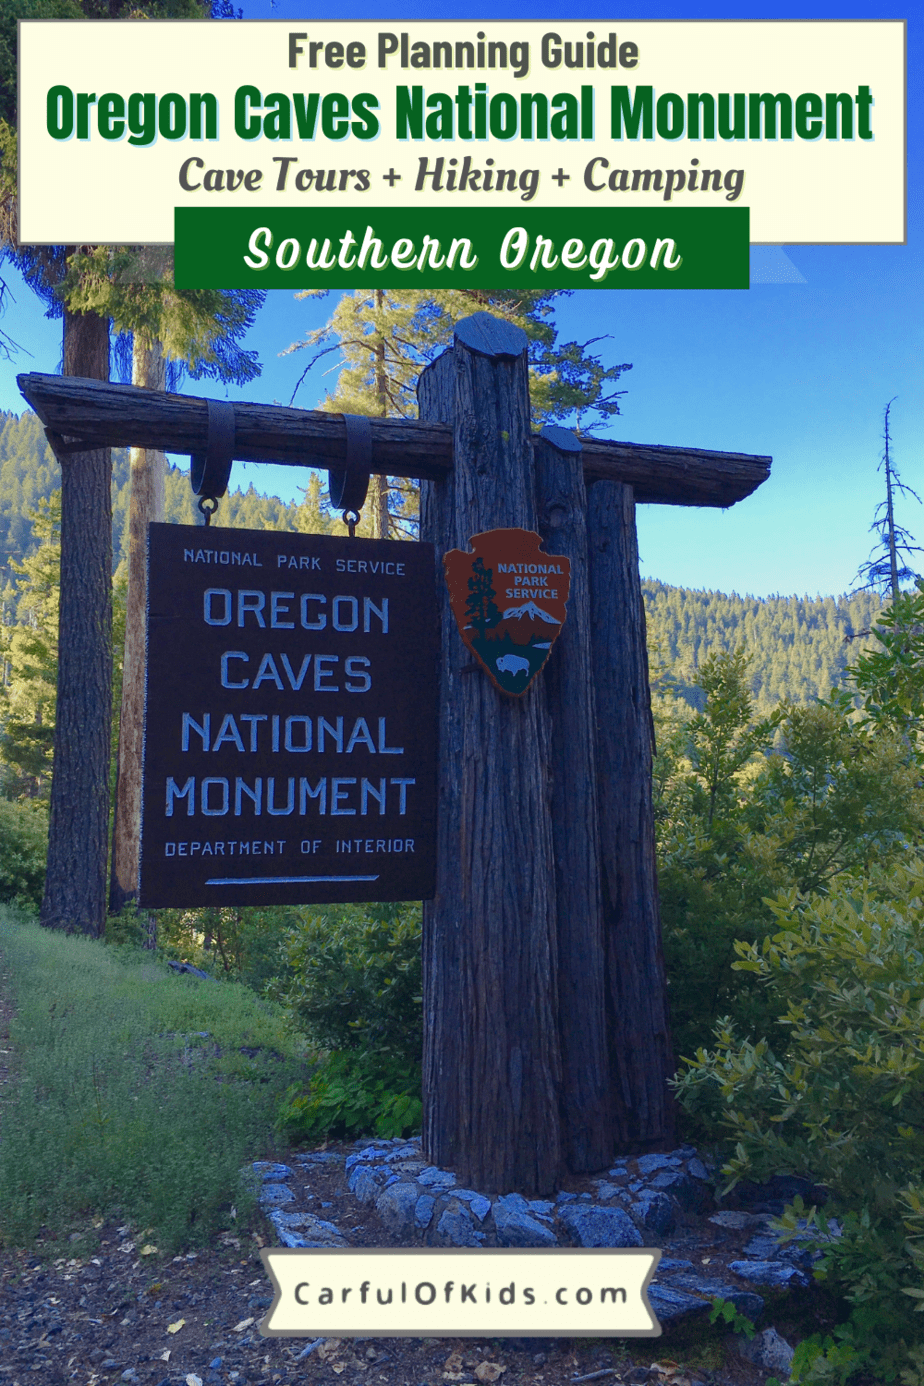 In Southern Oregon, discover Oregon Caves National Monument with its cave of marble. Along with cave tours, find hiking trails, picnic tables along with the Oregon Caves Chateau. Get the details on types of cave tours and nearby camping. What to do with kids at Oregon Caves | Caves tours in Oregon | Historic Lodges in National Parks #Oregon #NationalParks 